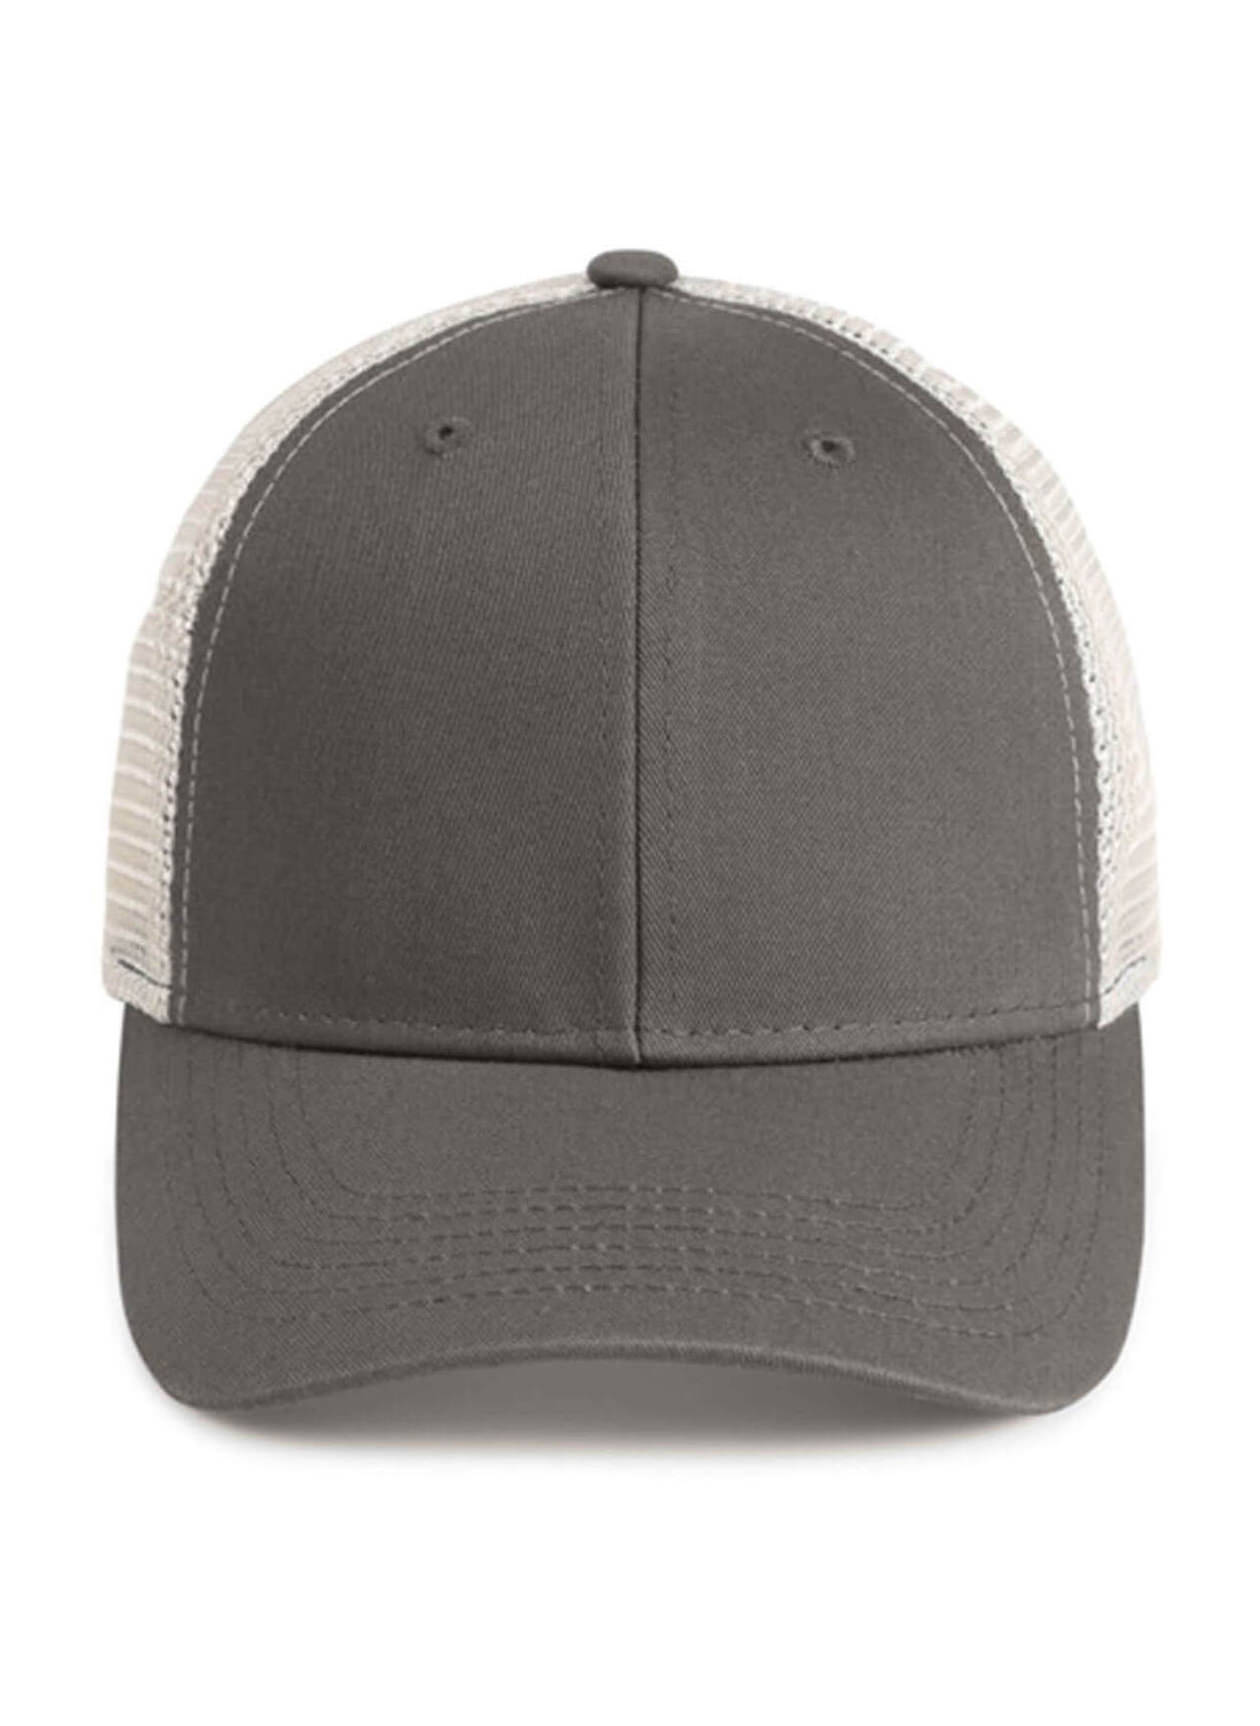 Imperial Charcoal / Stone The Catch & Release Hat Adjustable Meshback Hat